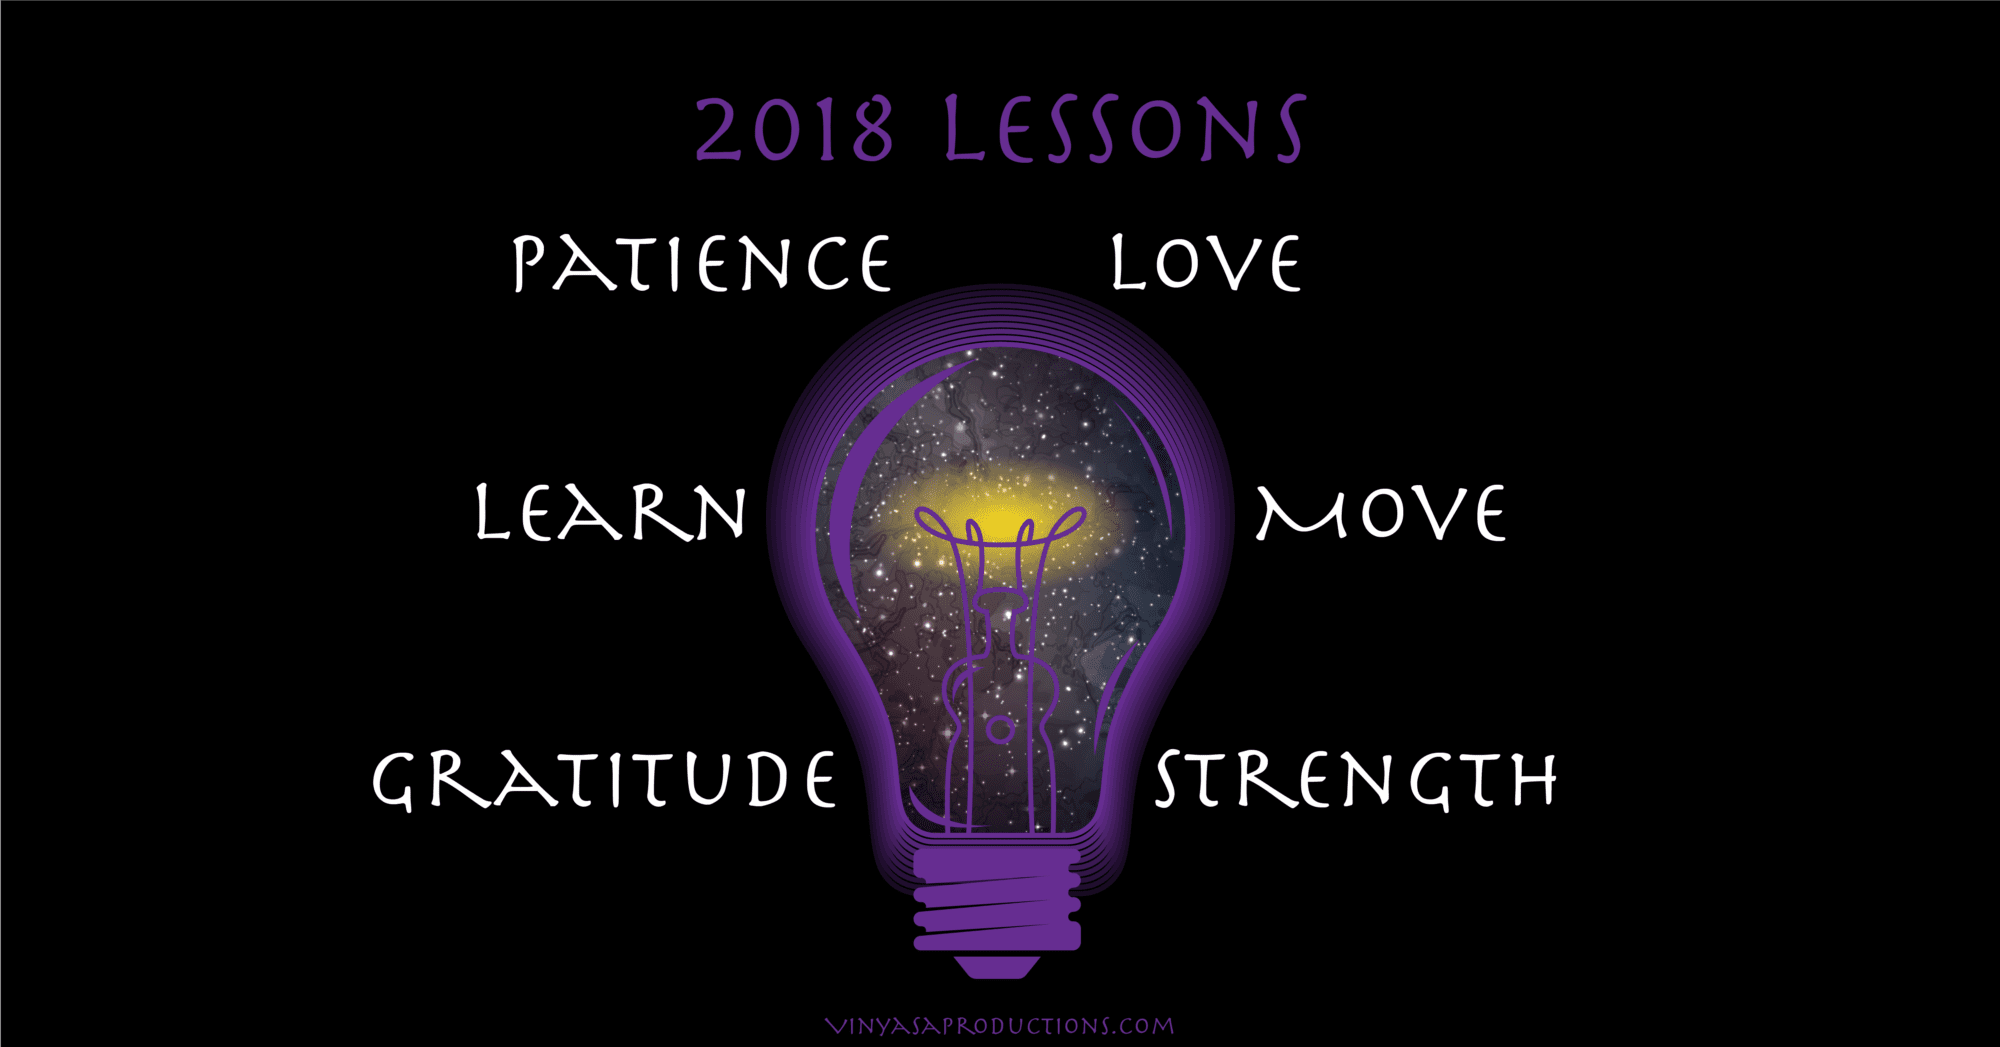 6 Lessons from 2018 | Saxcerpt | Vinyasa Productions